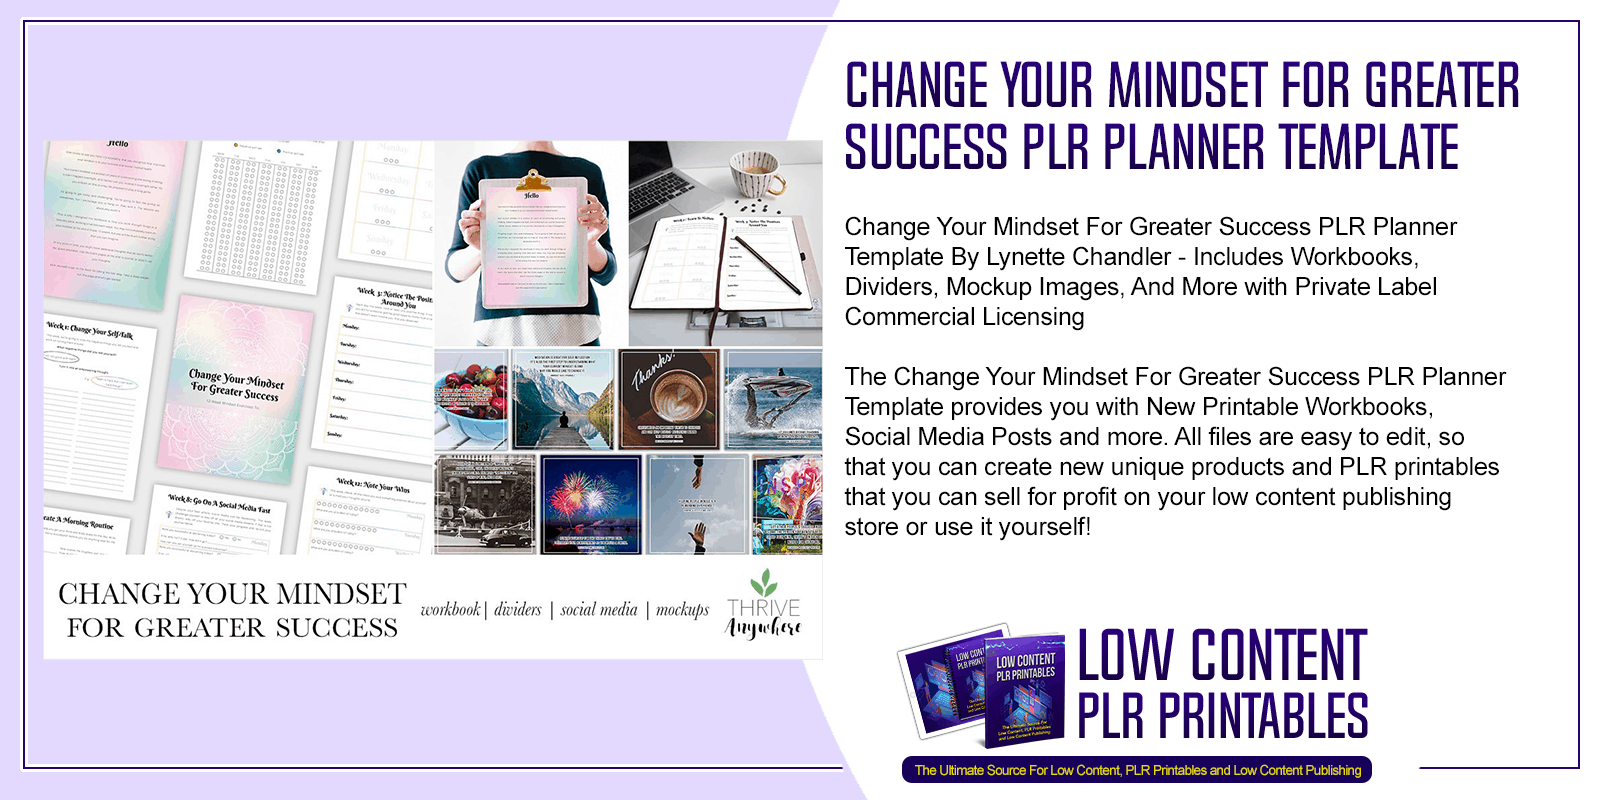 Change Your Mindset For Greater Success PLR Planner Template